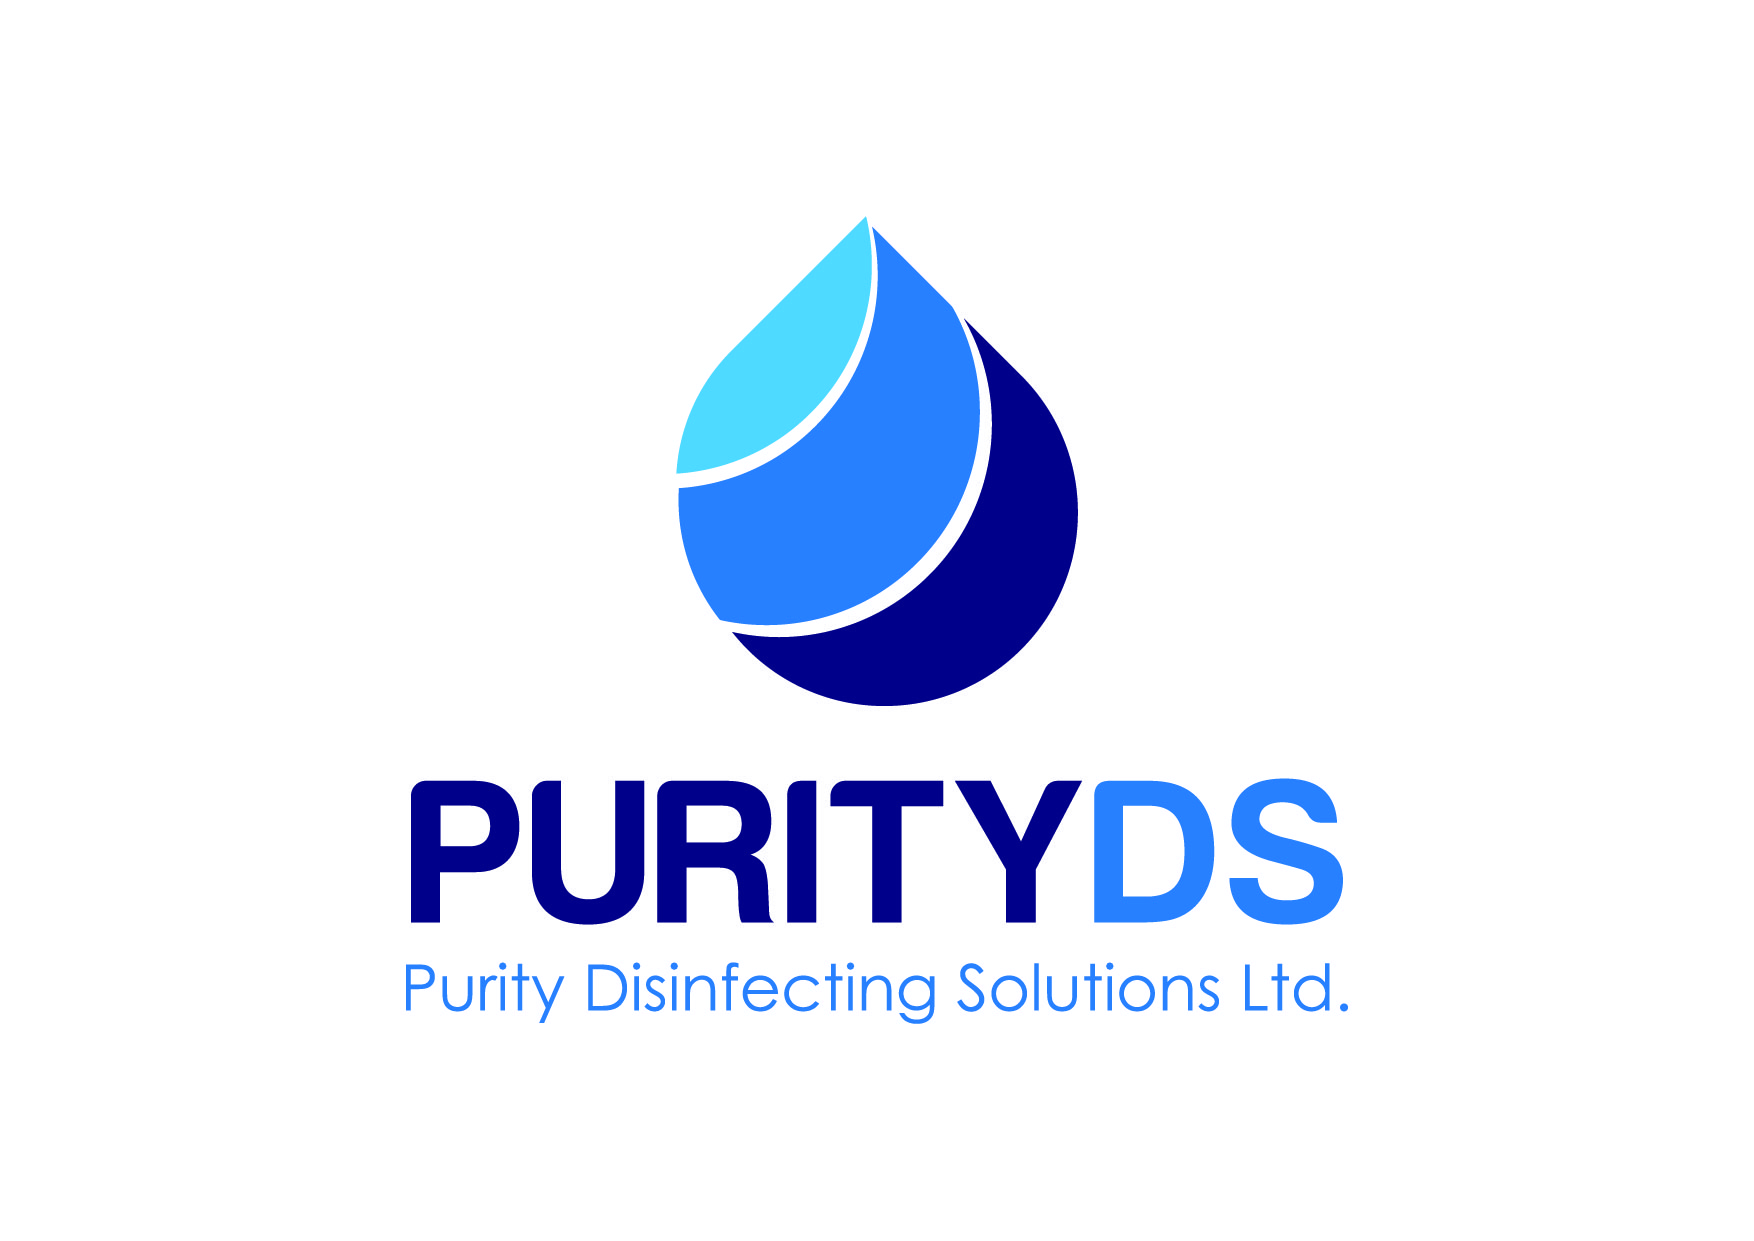 Purity Disinfecting Solutions Ltd